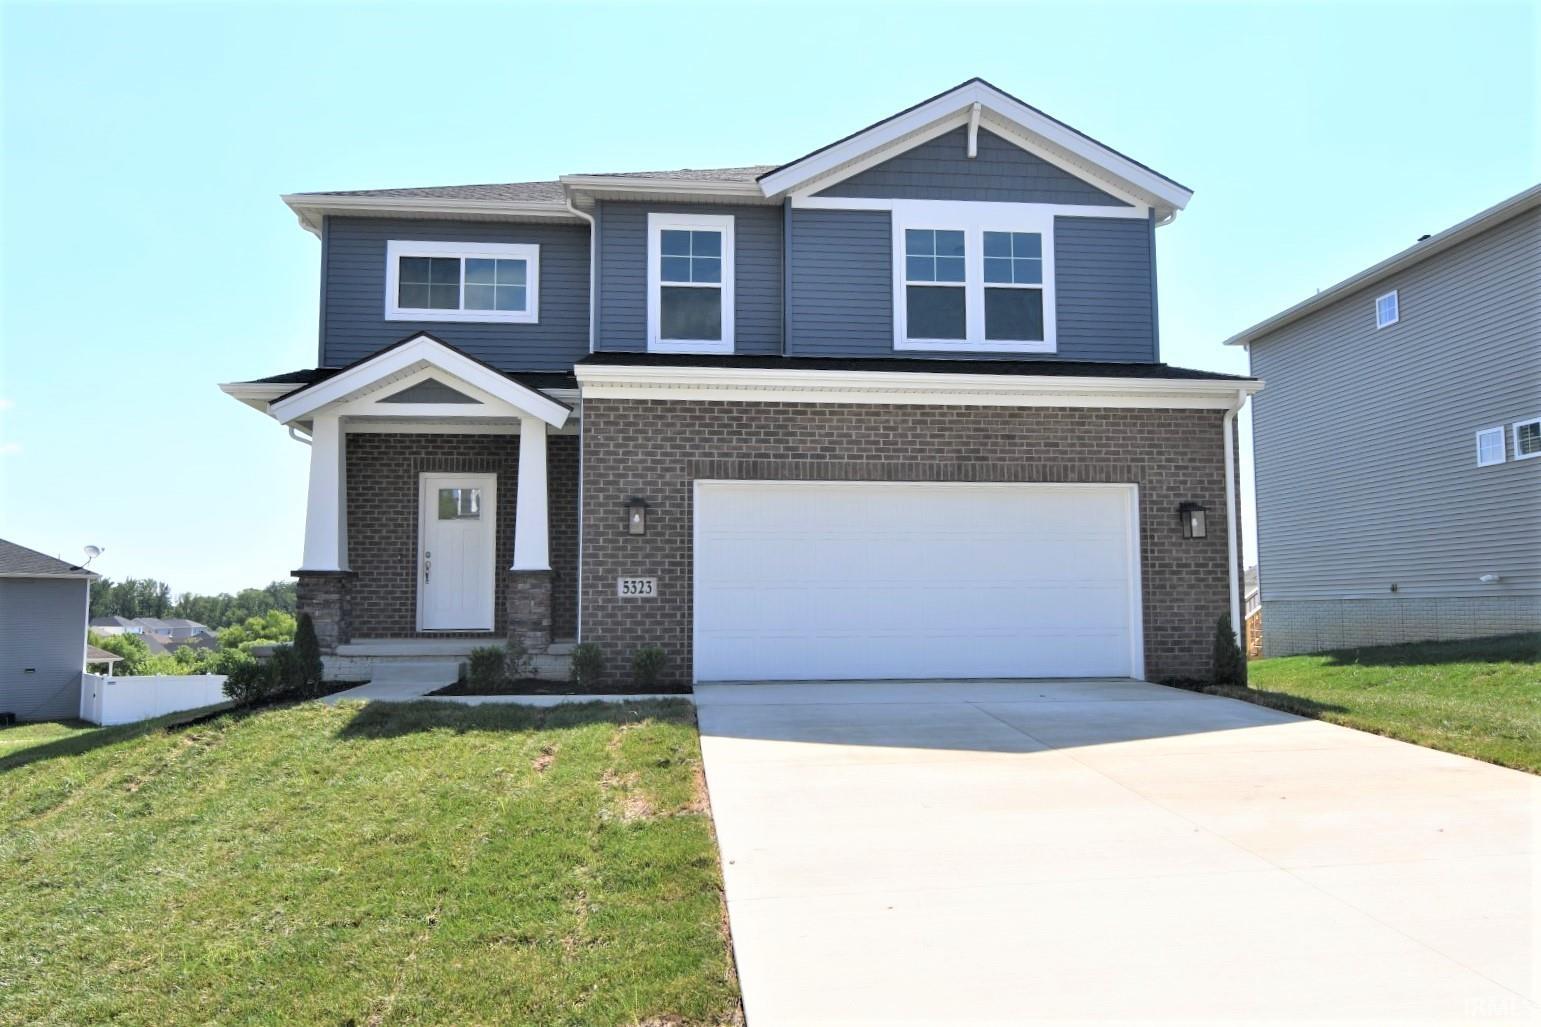 5323 Cameo Drive, Evansville, IN 47711